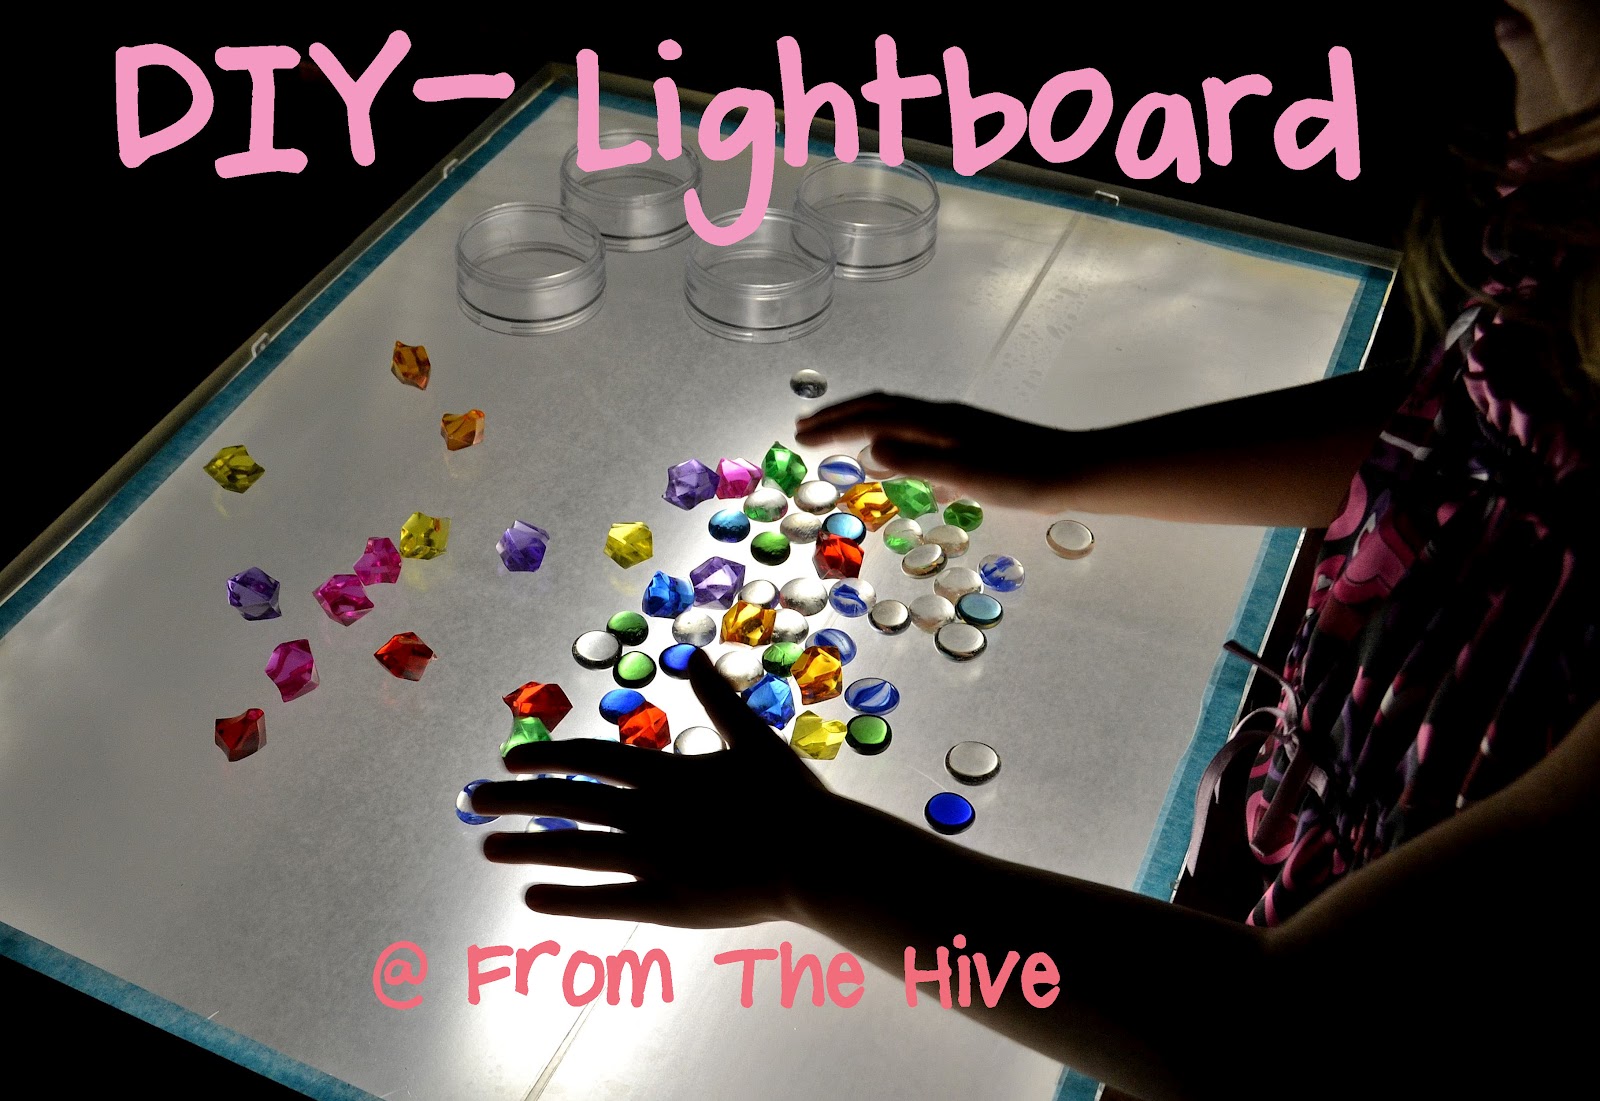 From The Hive: DIY Lightboard